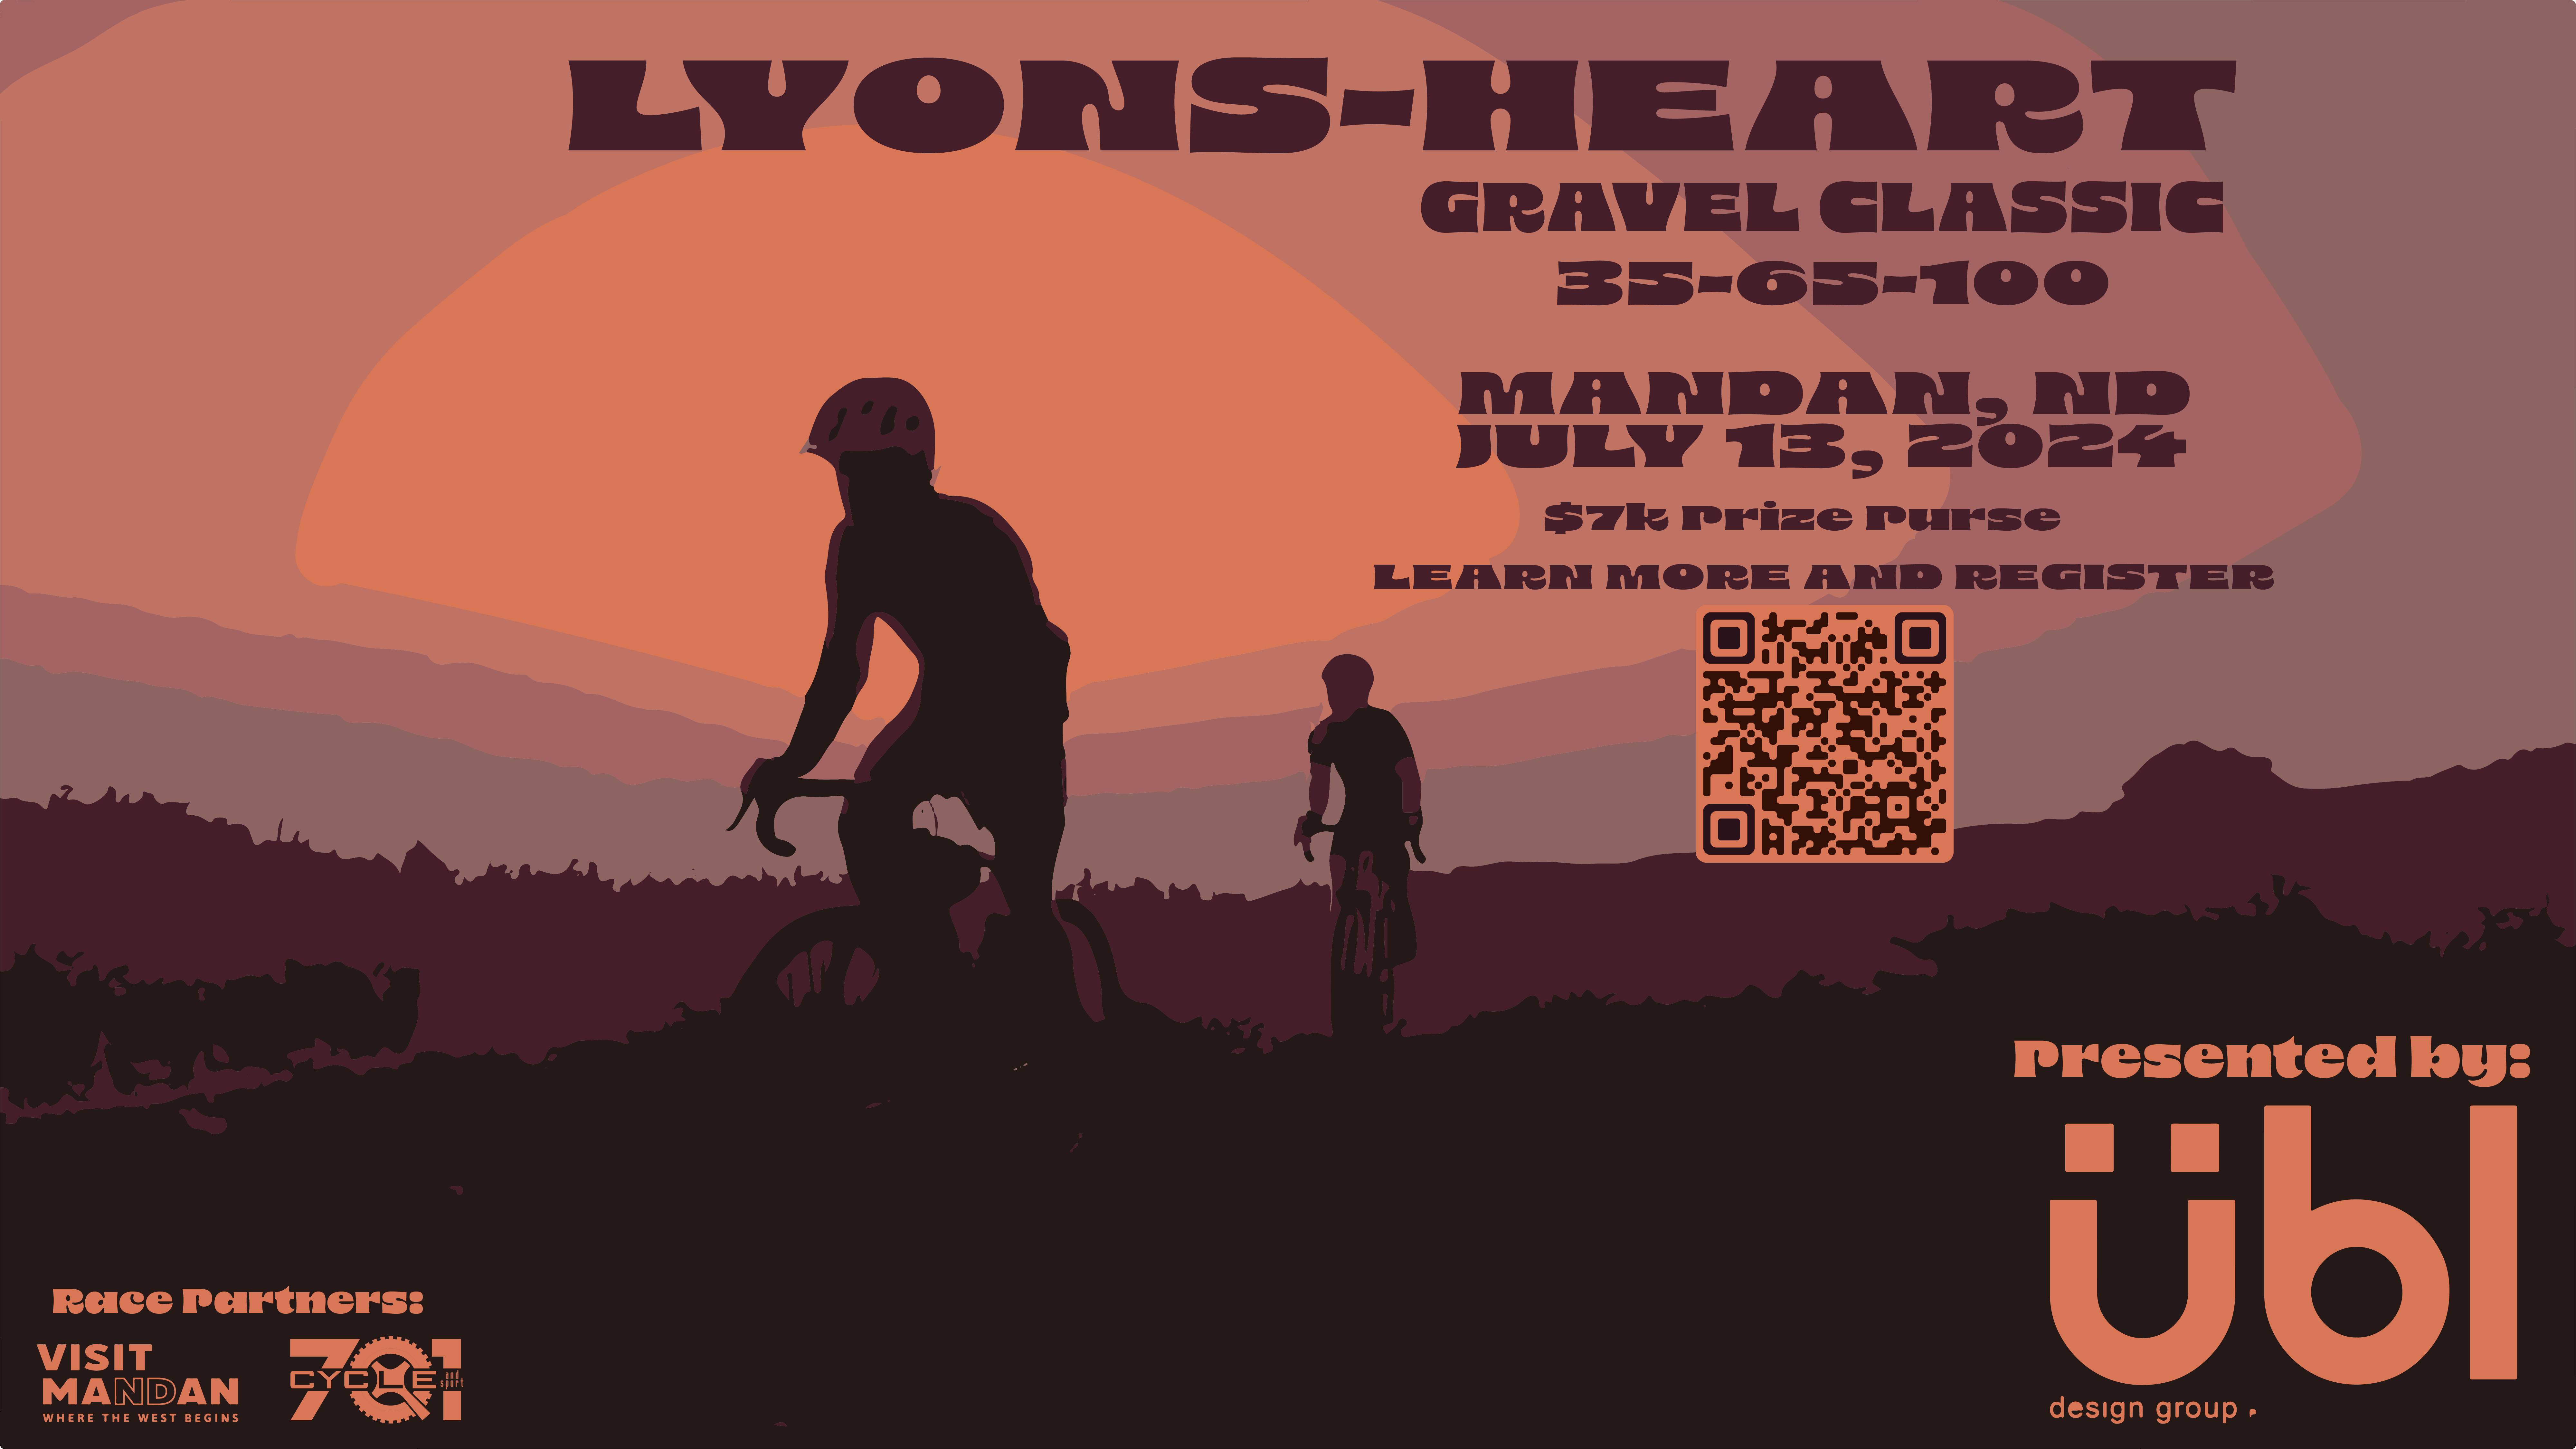 A New Race for 2024, the Lyons-Heart Gravel Classic